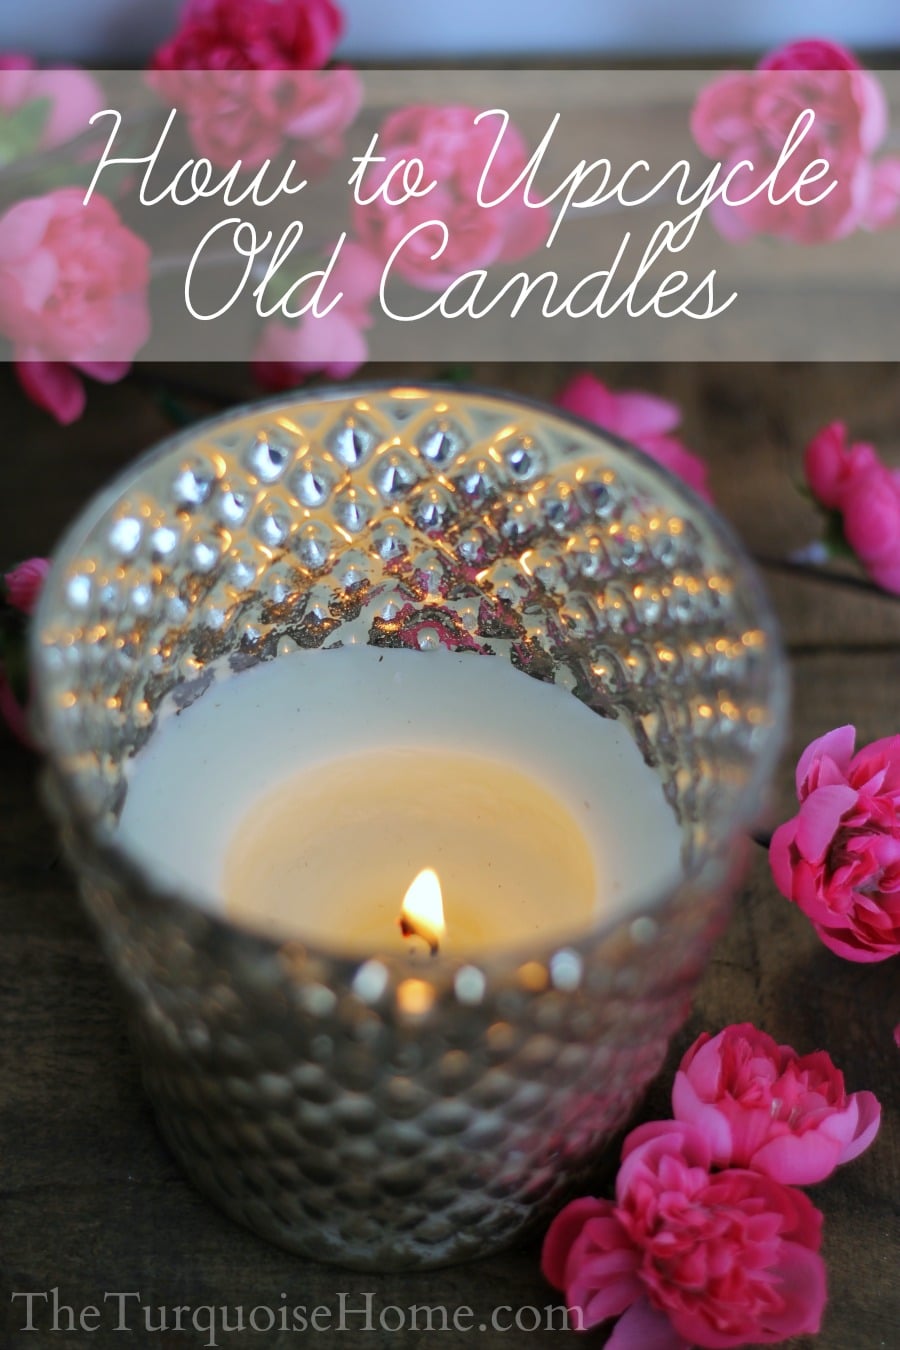 How to Upcycle Old Candles